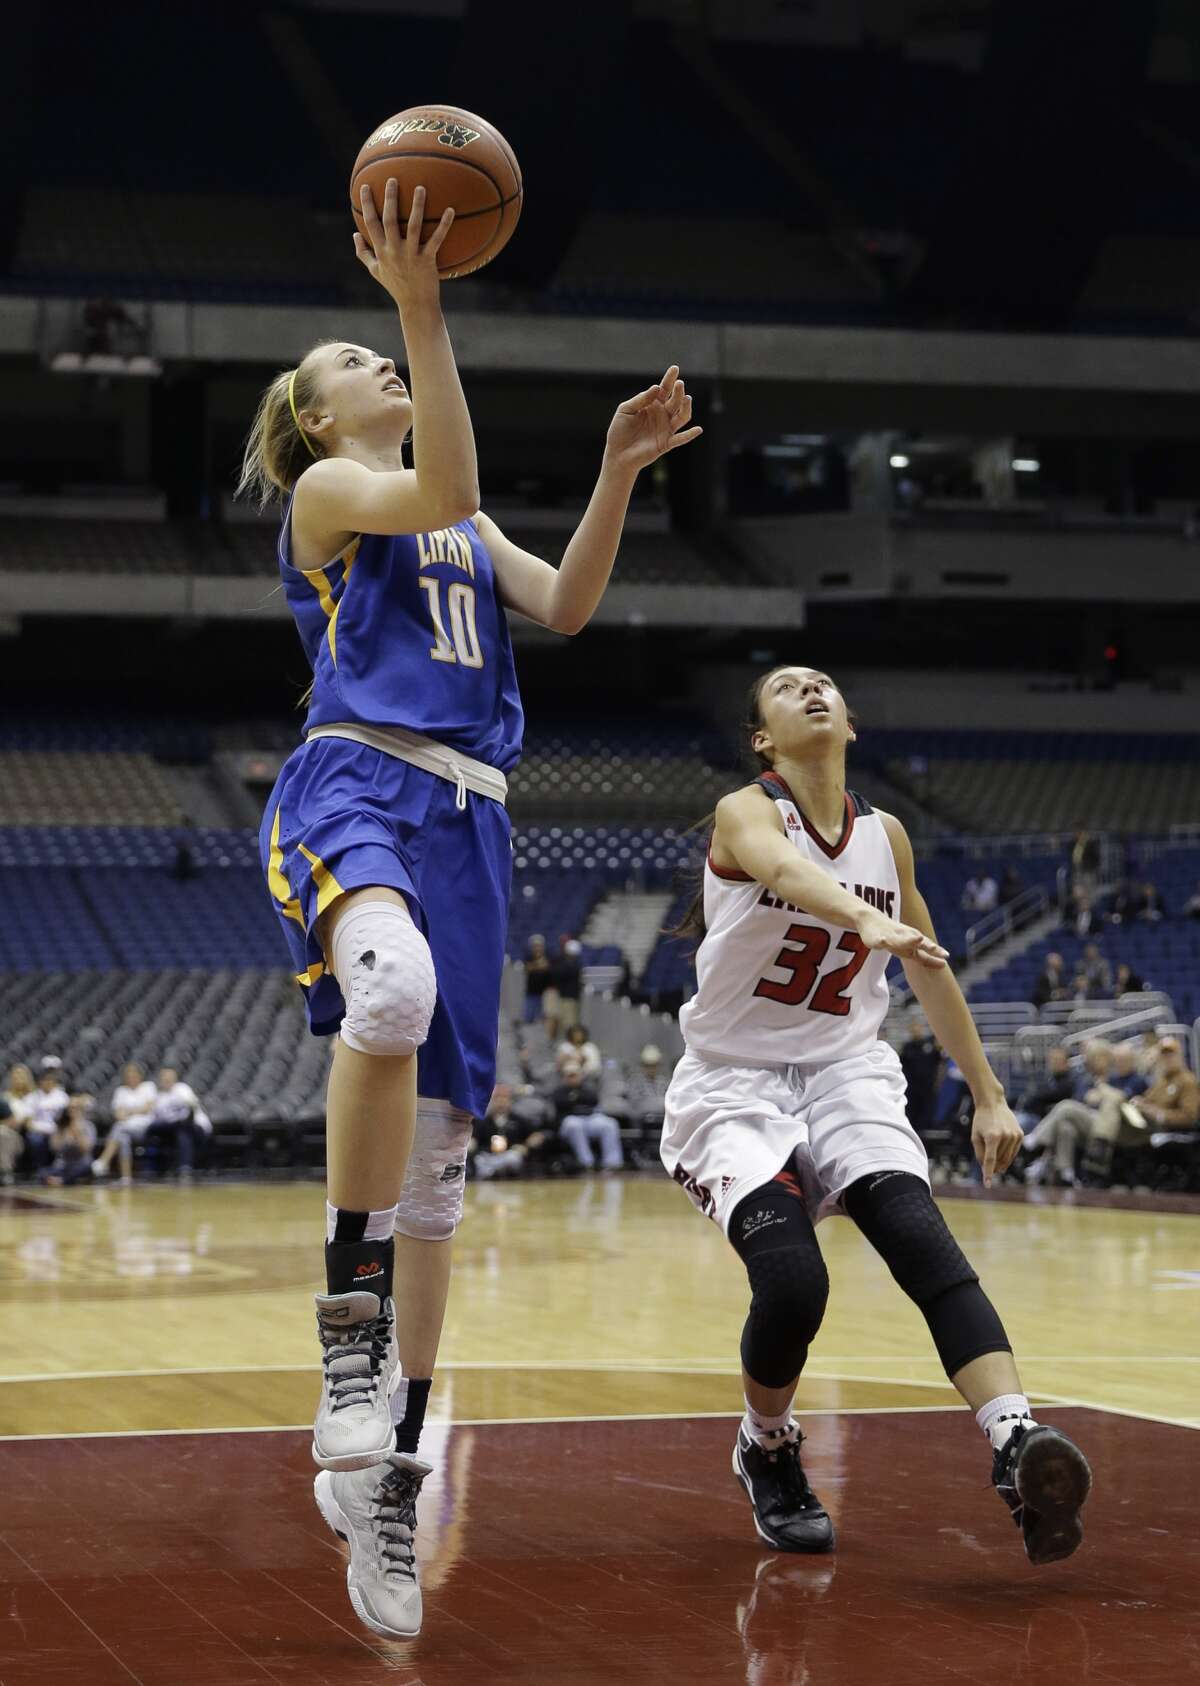 Lipan High School's Lanie Roberts (10) drives to the basket past Roby High School's Isabel Carrion (32) during a UIL Class 1A girls high school state semifinal basketball game, Thursday, March 3, 2016, in San Antonio.Lipan won 74-46; Roberts scored 49 points. (AP Photo/Eric Gay)